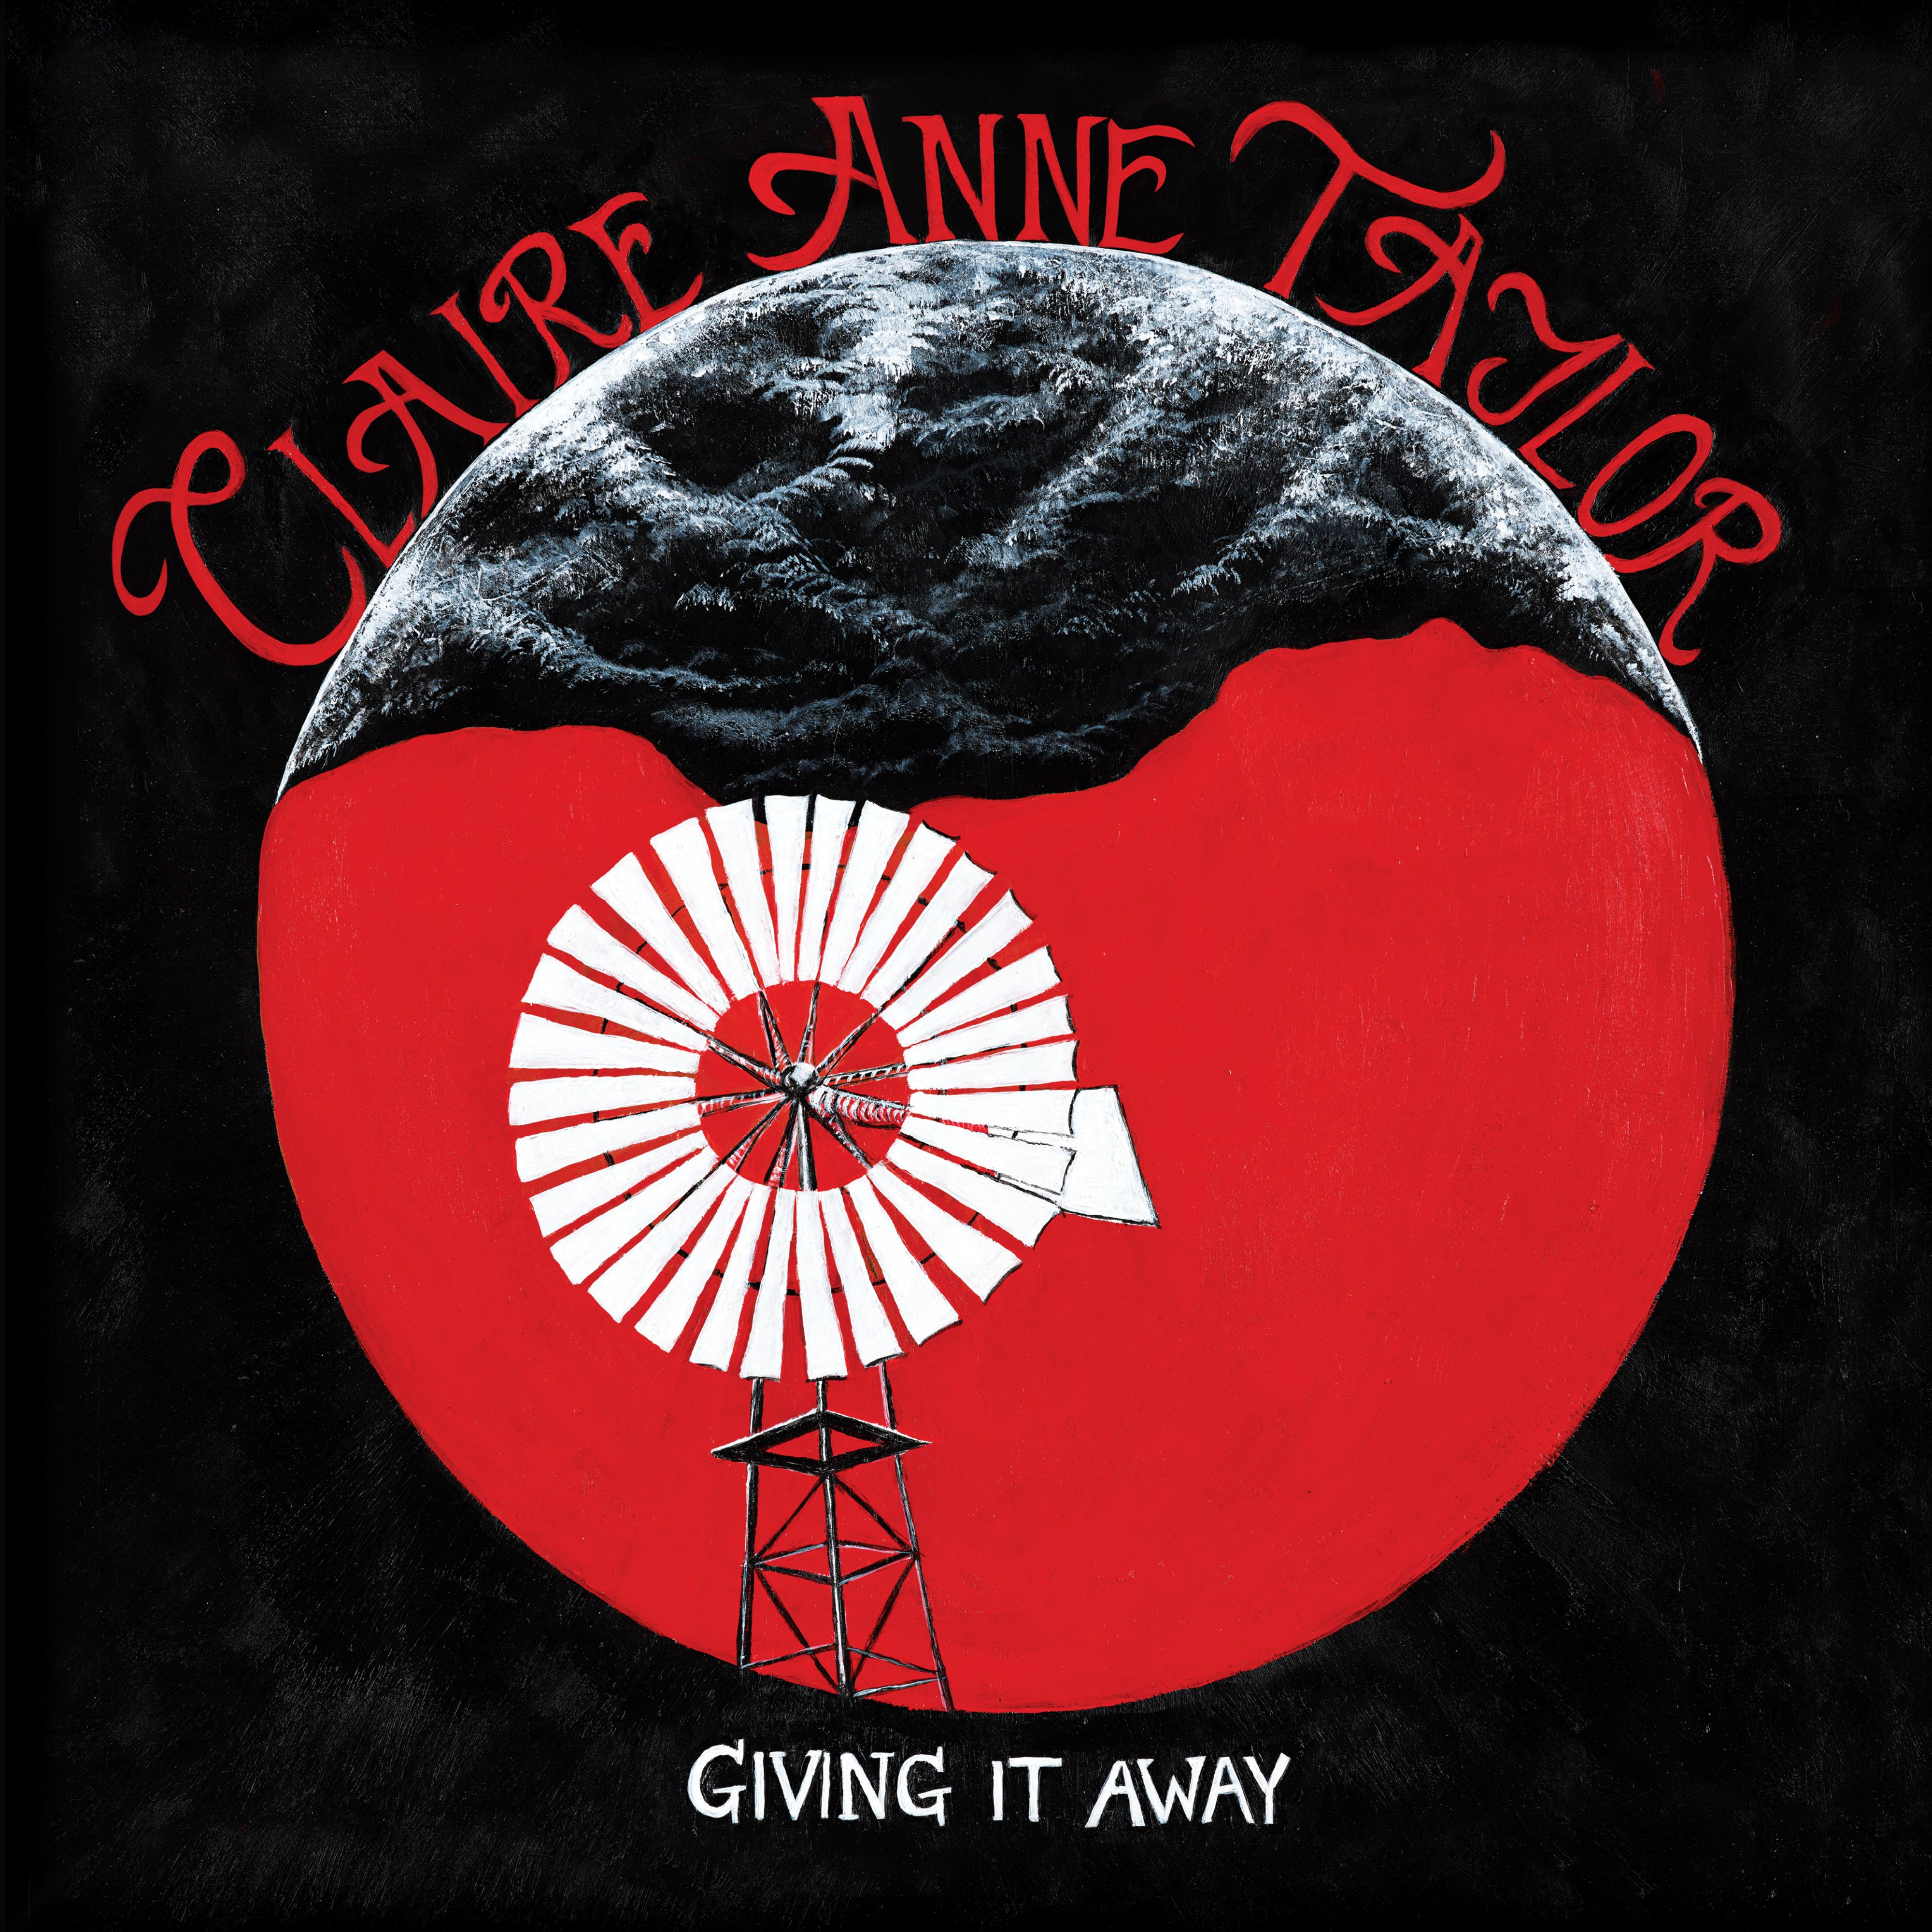 ALBUM REVIEW: Claire Anne Taylor – Giving It Away